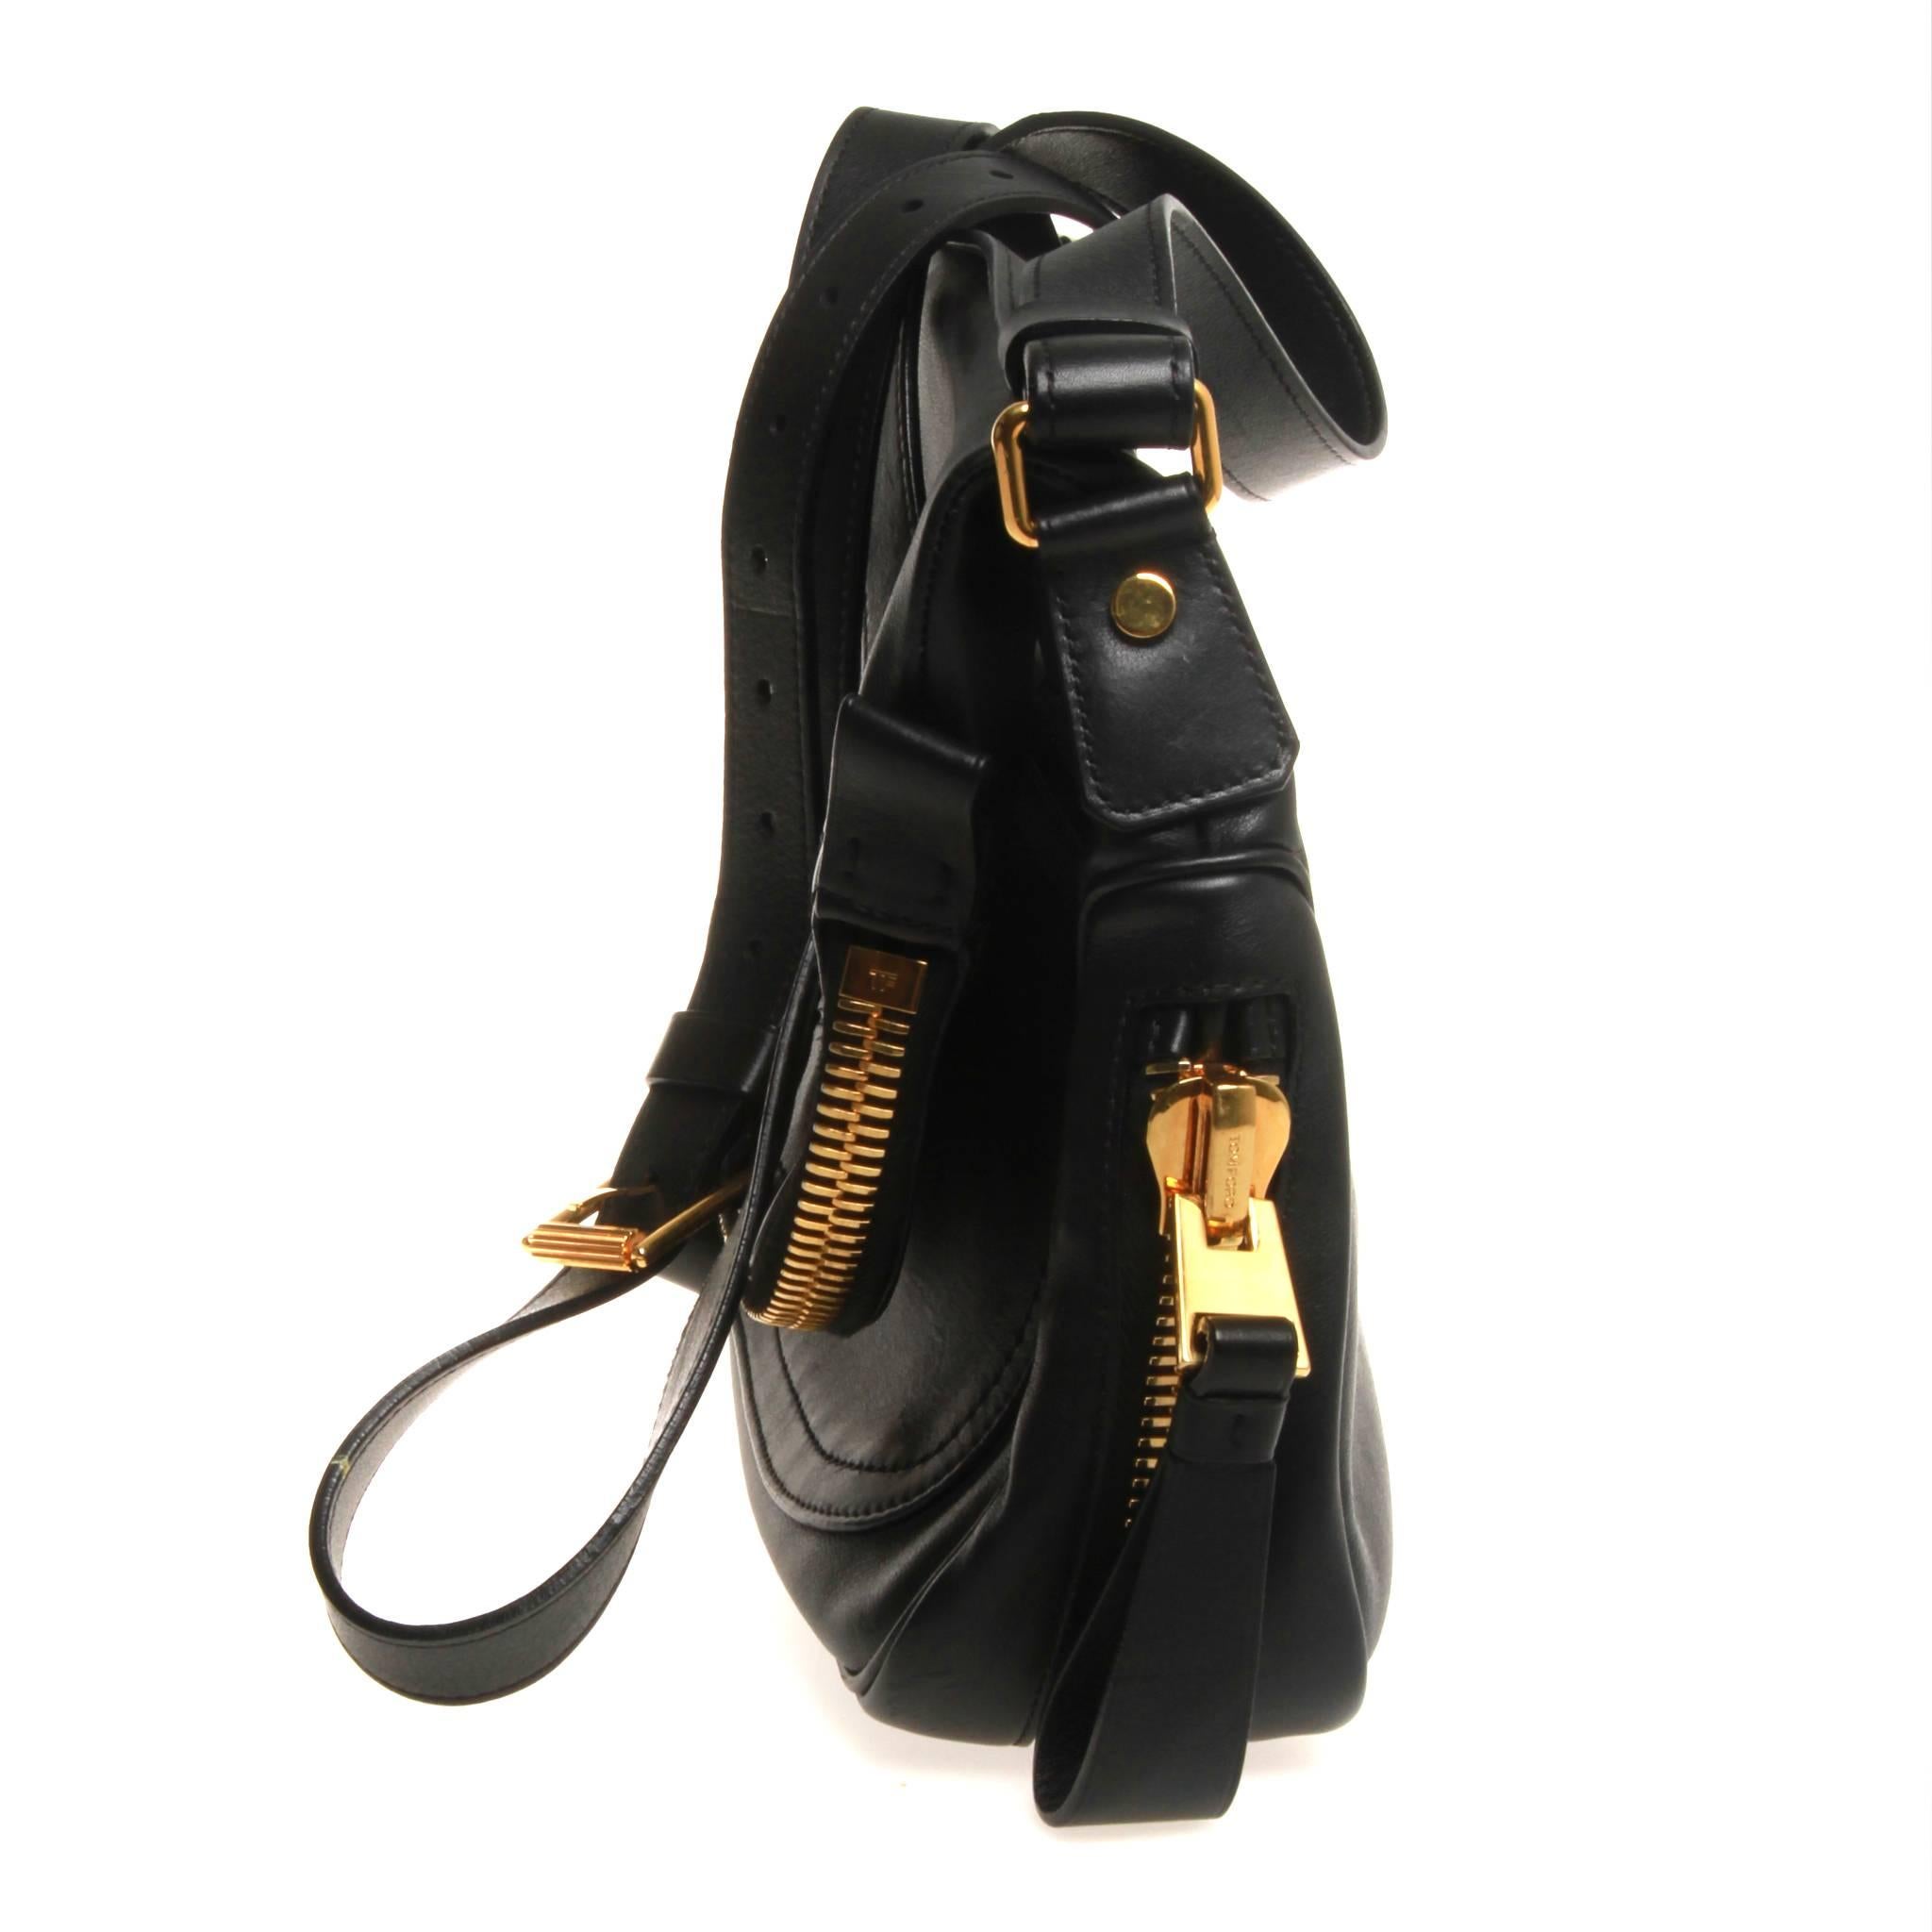 Black grained leather Tom Ford Medium Jennifer bag with gold-tone hardware, adjustable shoulder strap, zip expansion at perimeter, dual pockets at exterior; one with zip closure, black suede interior, single pocket at interior wall with zip closure